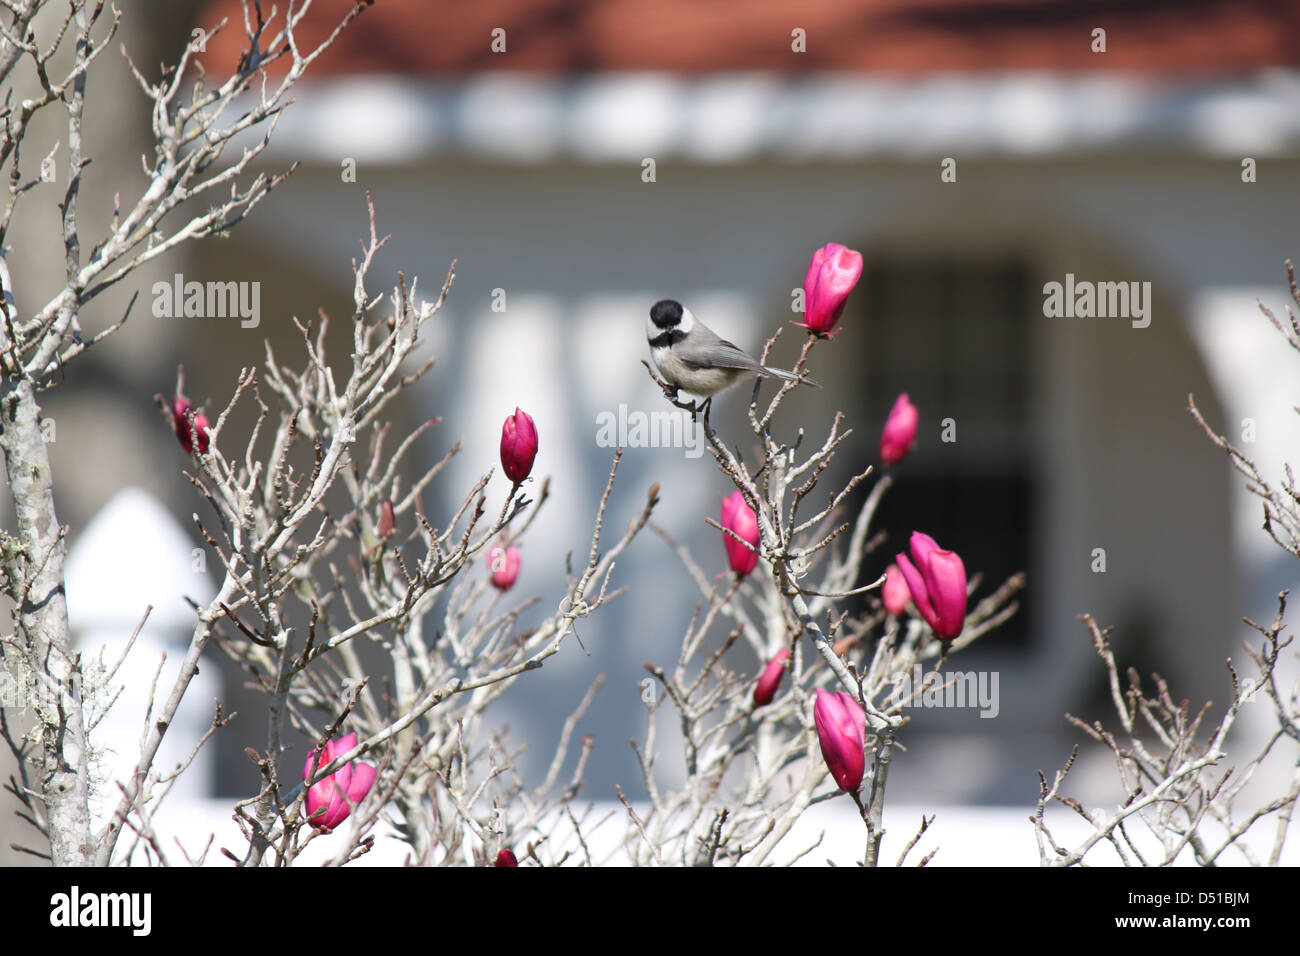 Spring approaches as this litlte chickadee bird perches upon a blooming flower. Stock Photo